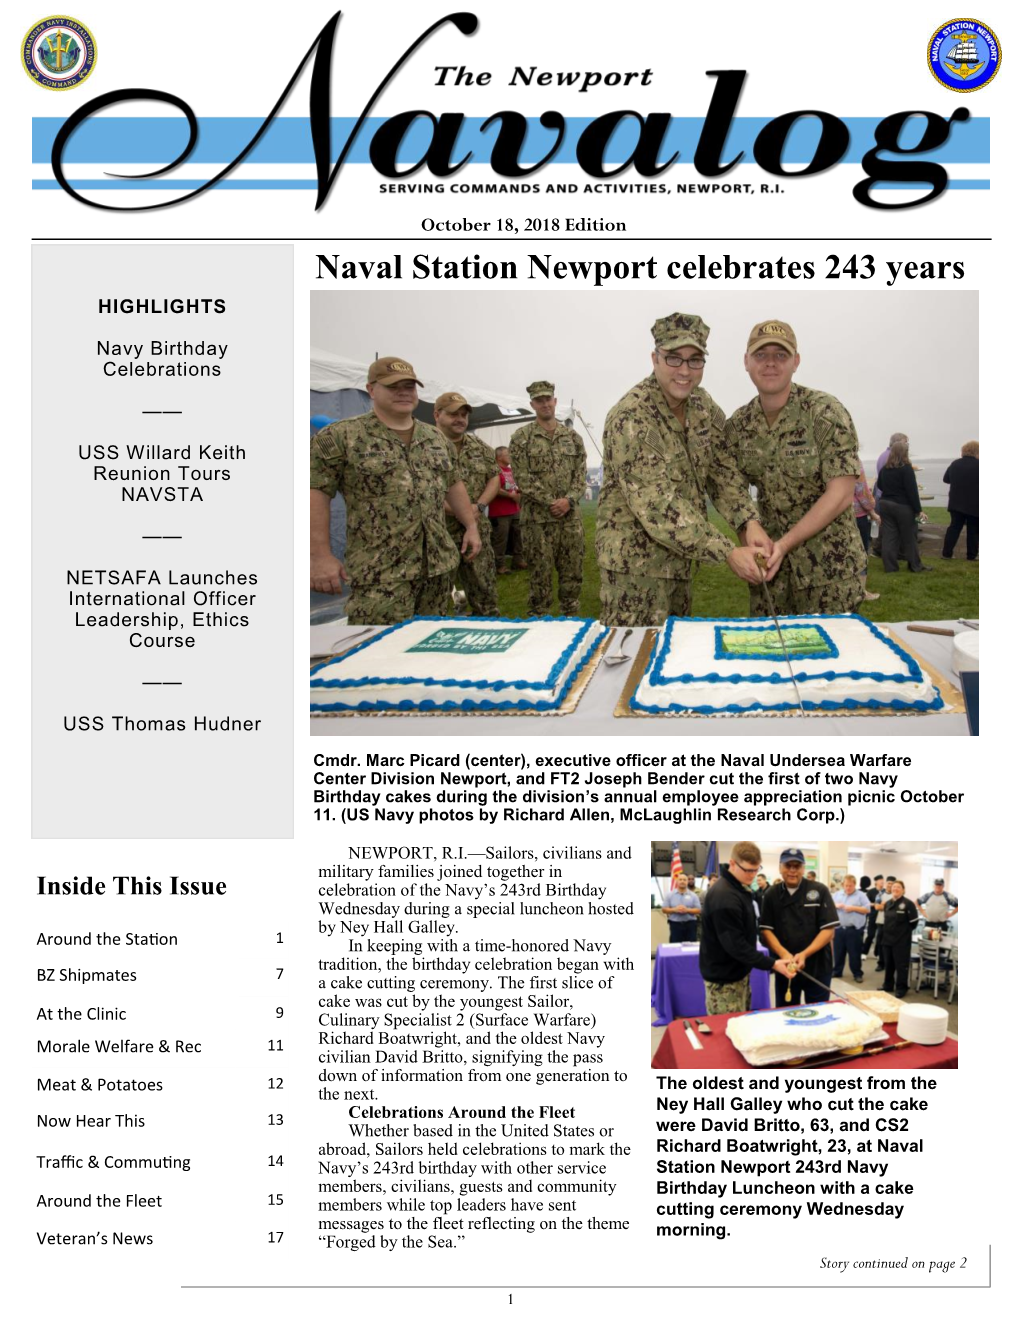 Naval Station Newport Celebrates 243 Years HIGHLIGHTS